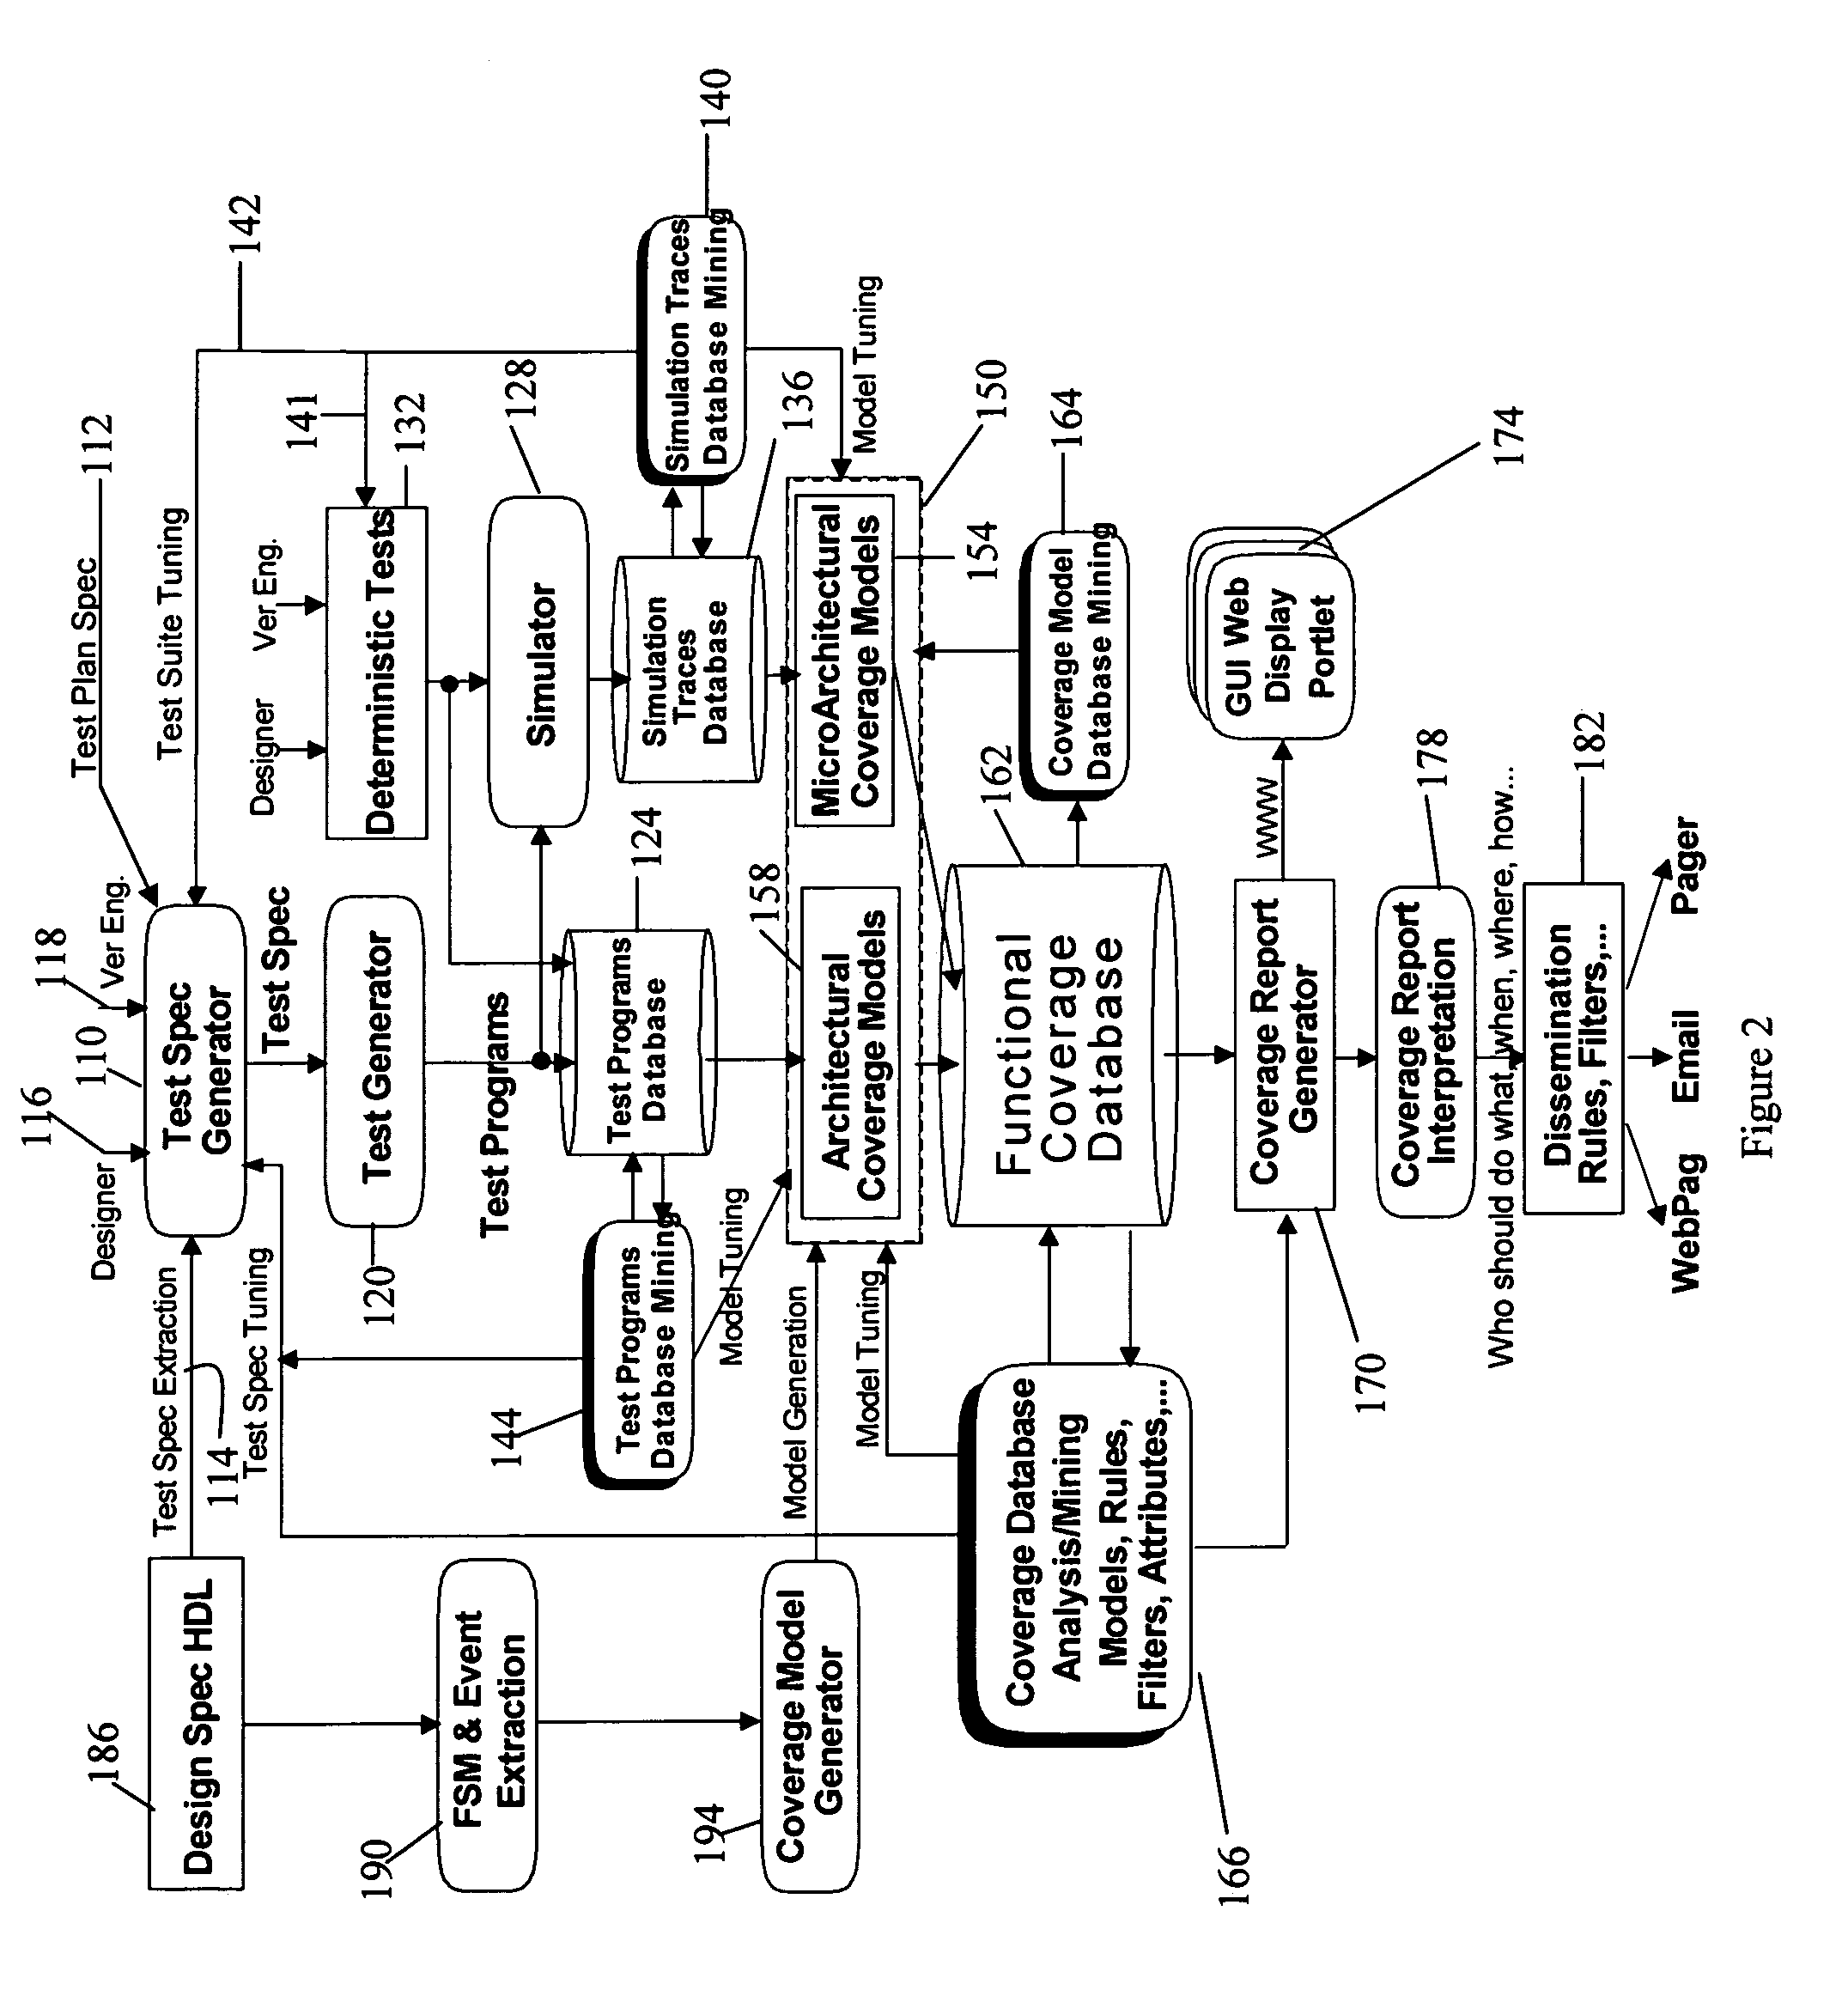 Database mining system and method for coverage analysis of functional verification of integrated circuit designs